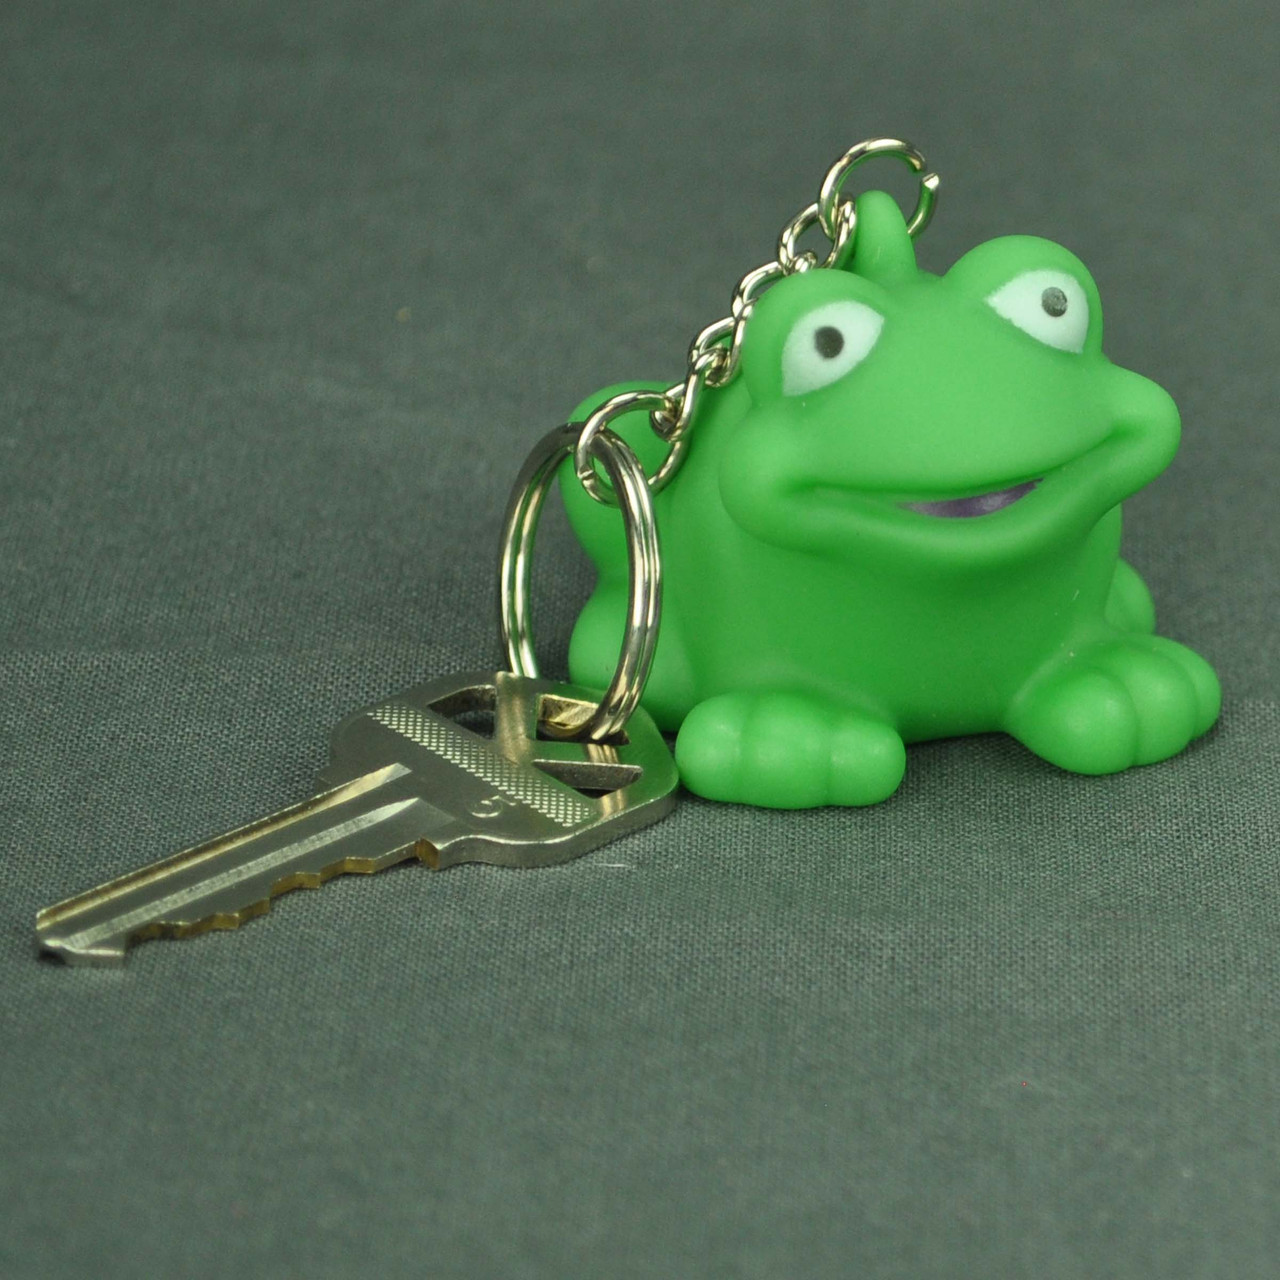 Shop for and Buy Rubber Frog Key Chain at . Large